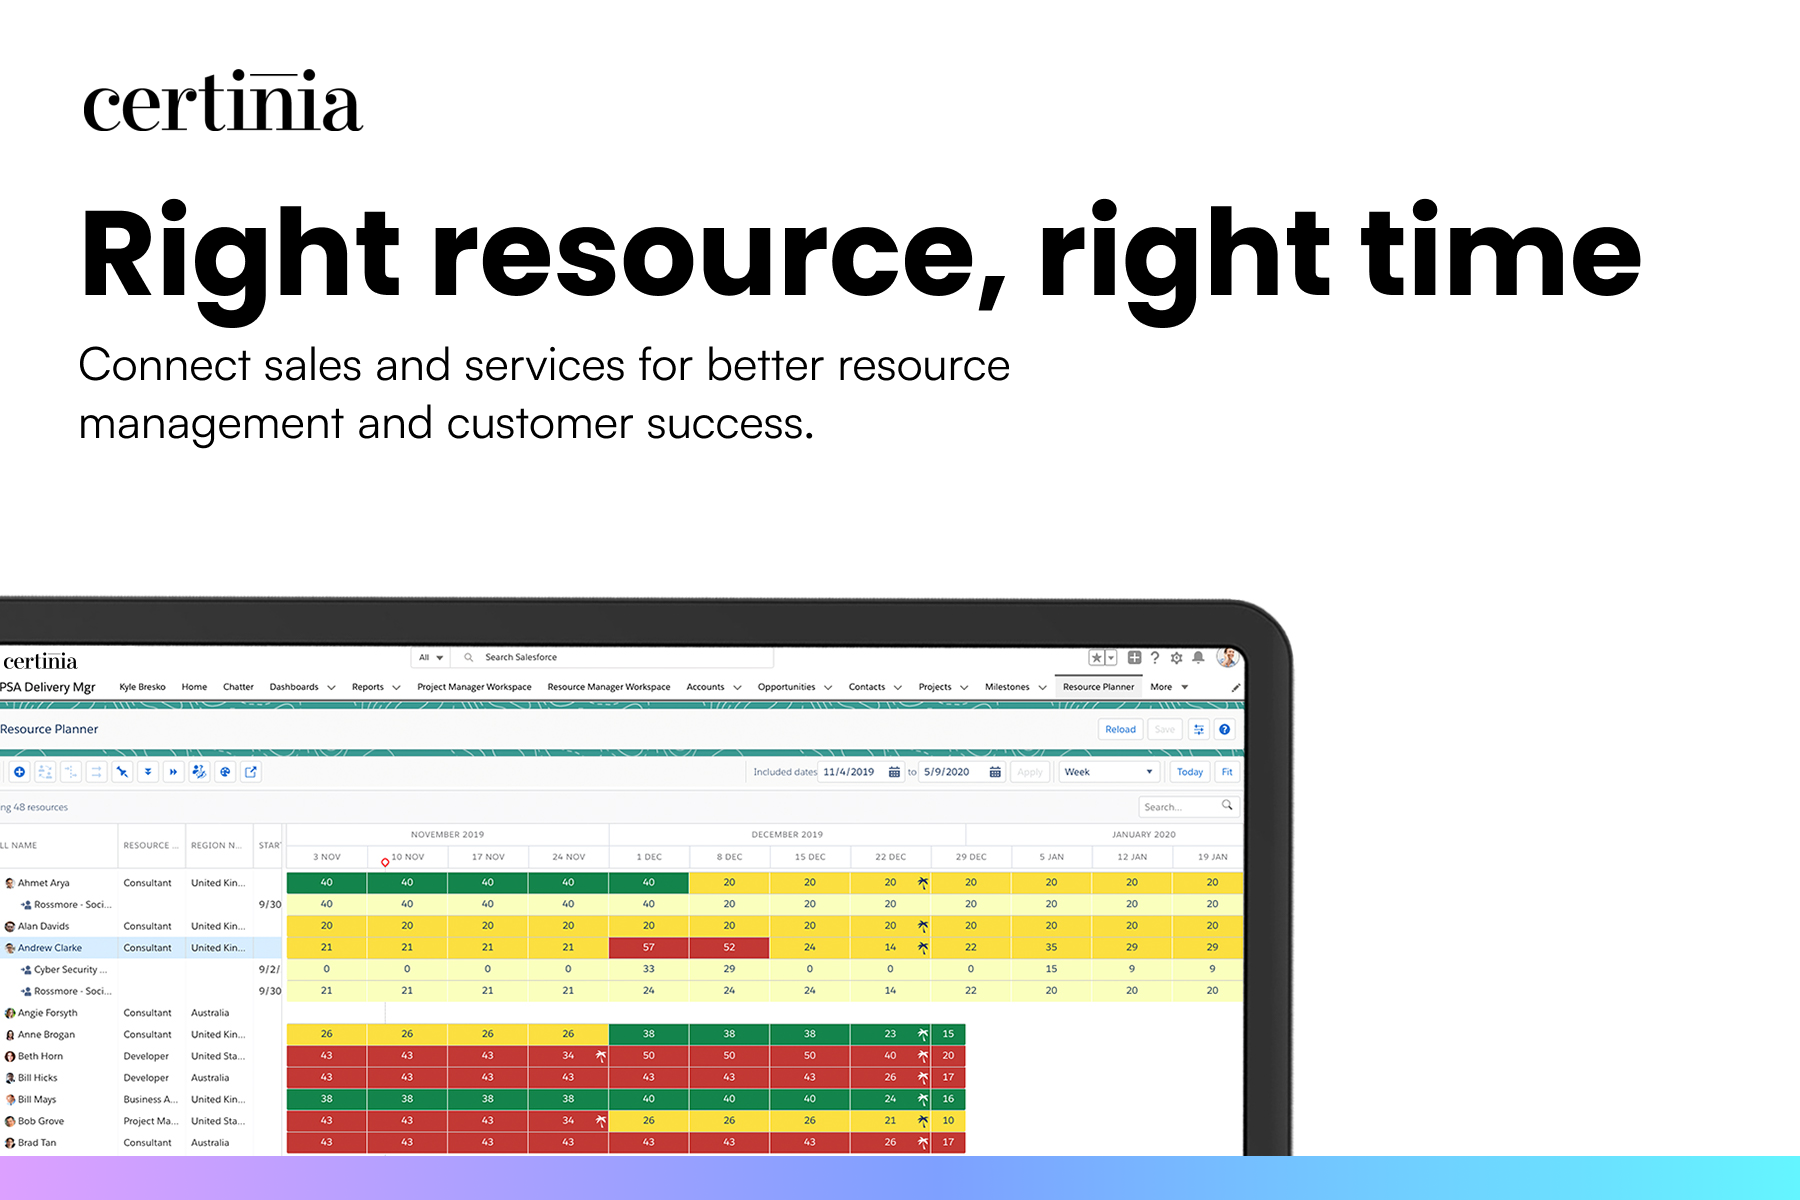 Connect sales and services for better resource management and customer outcomes.